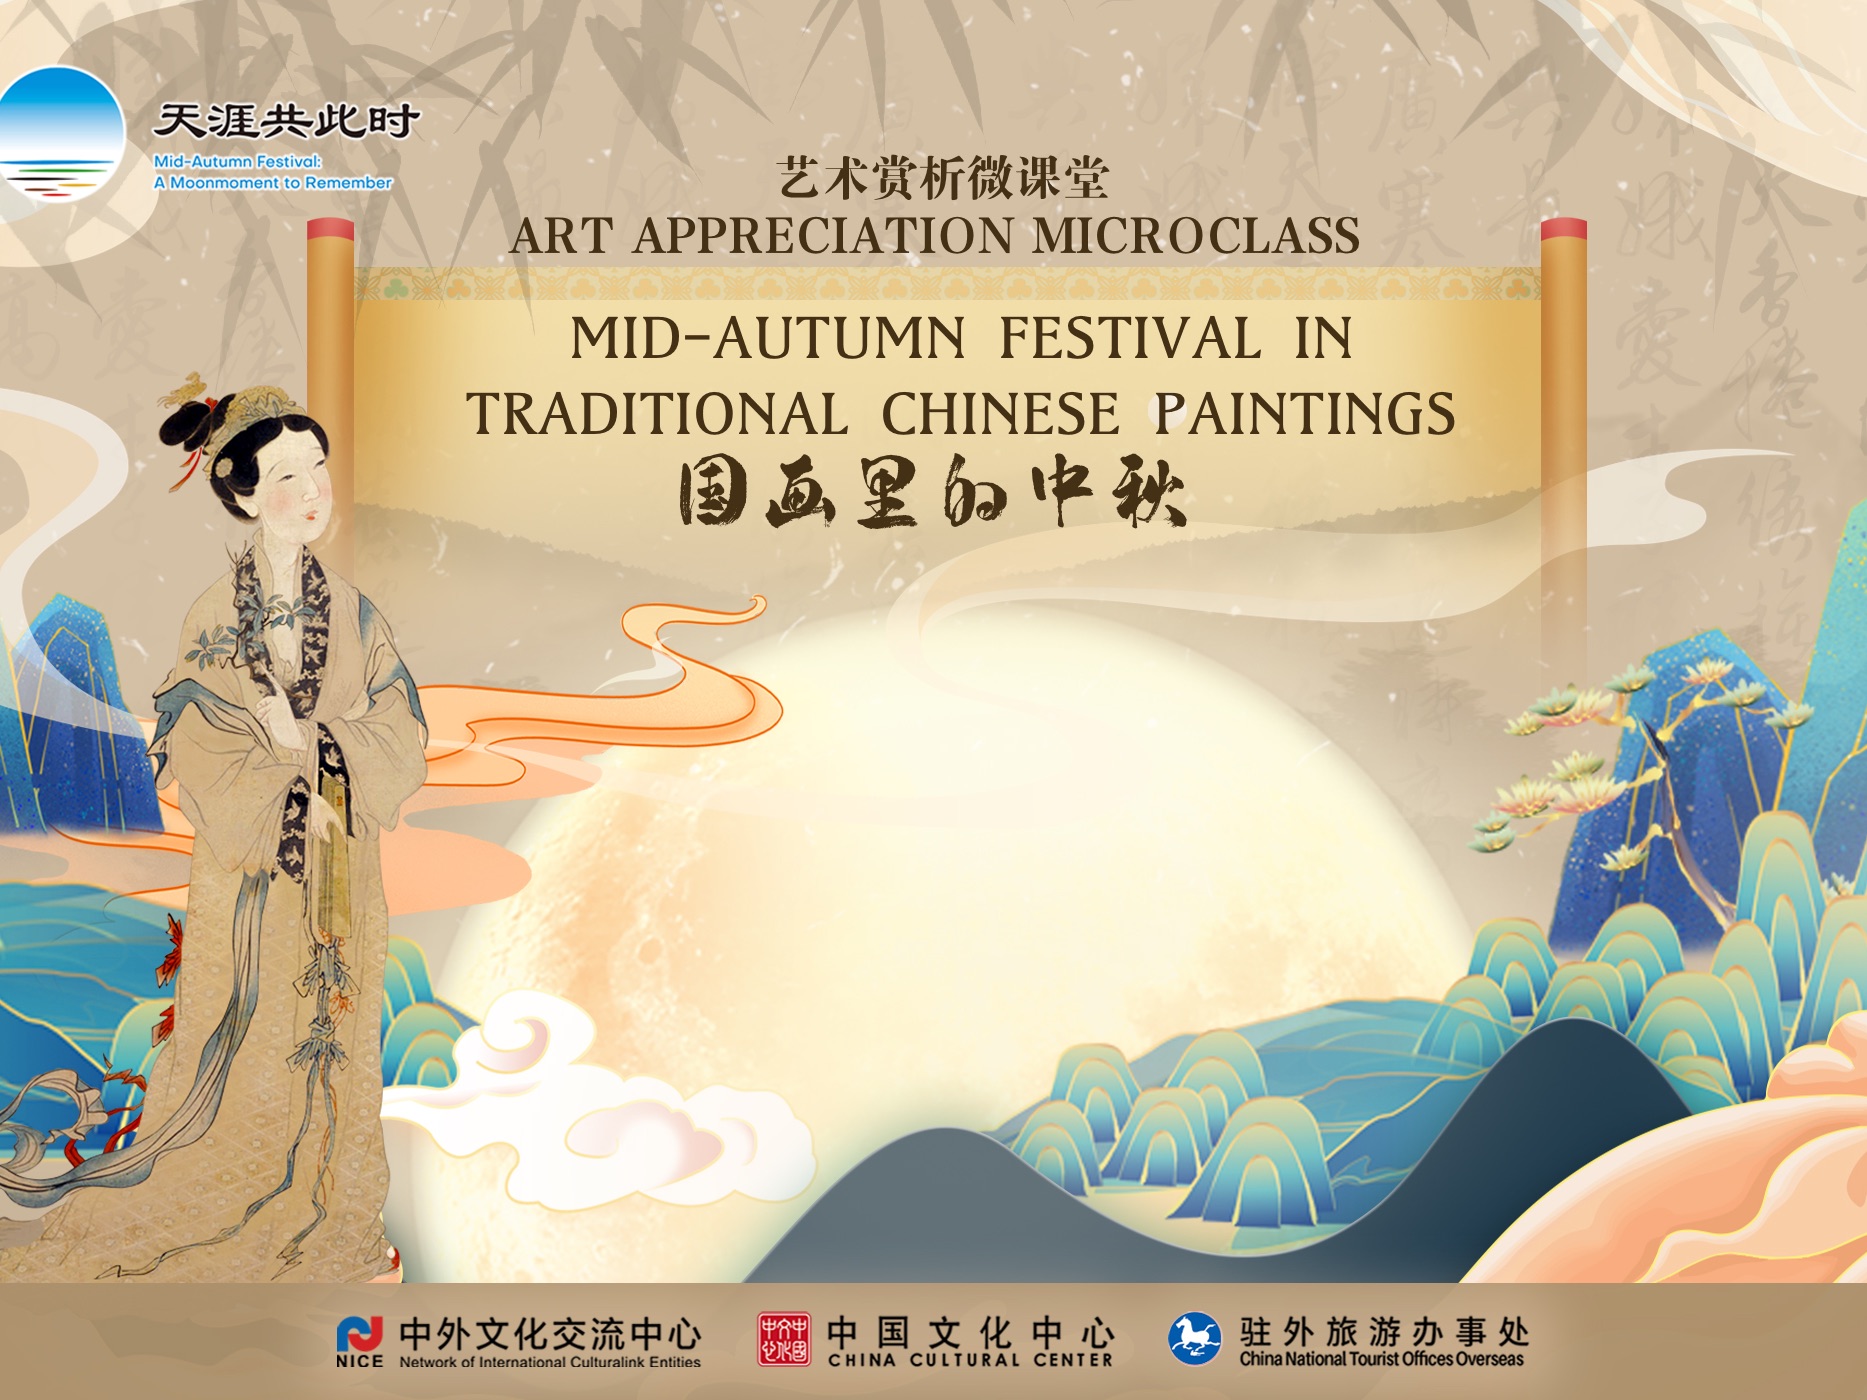 Mid-Autumn Festival in Traditional Chinese Paintings: Art Appreciation Microclass